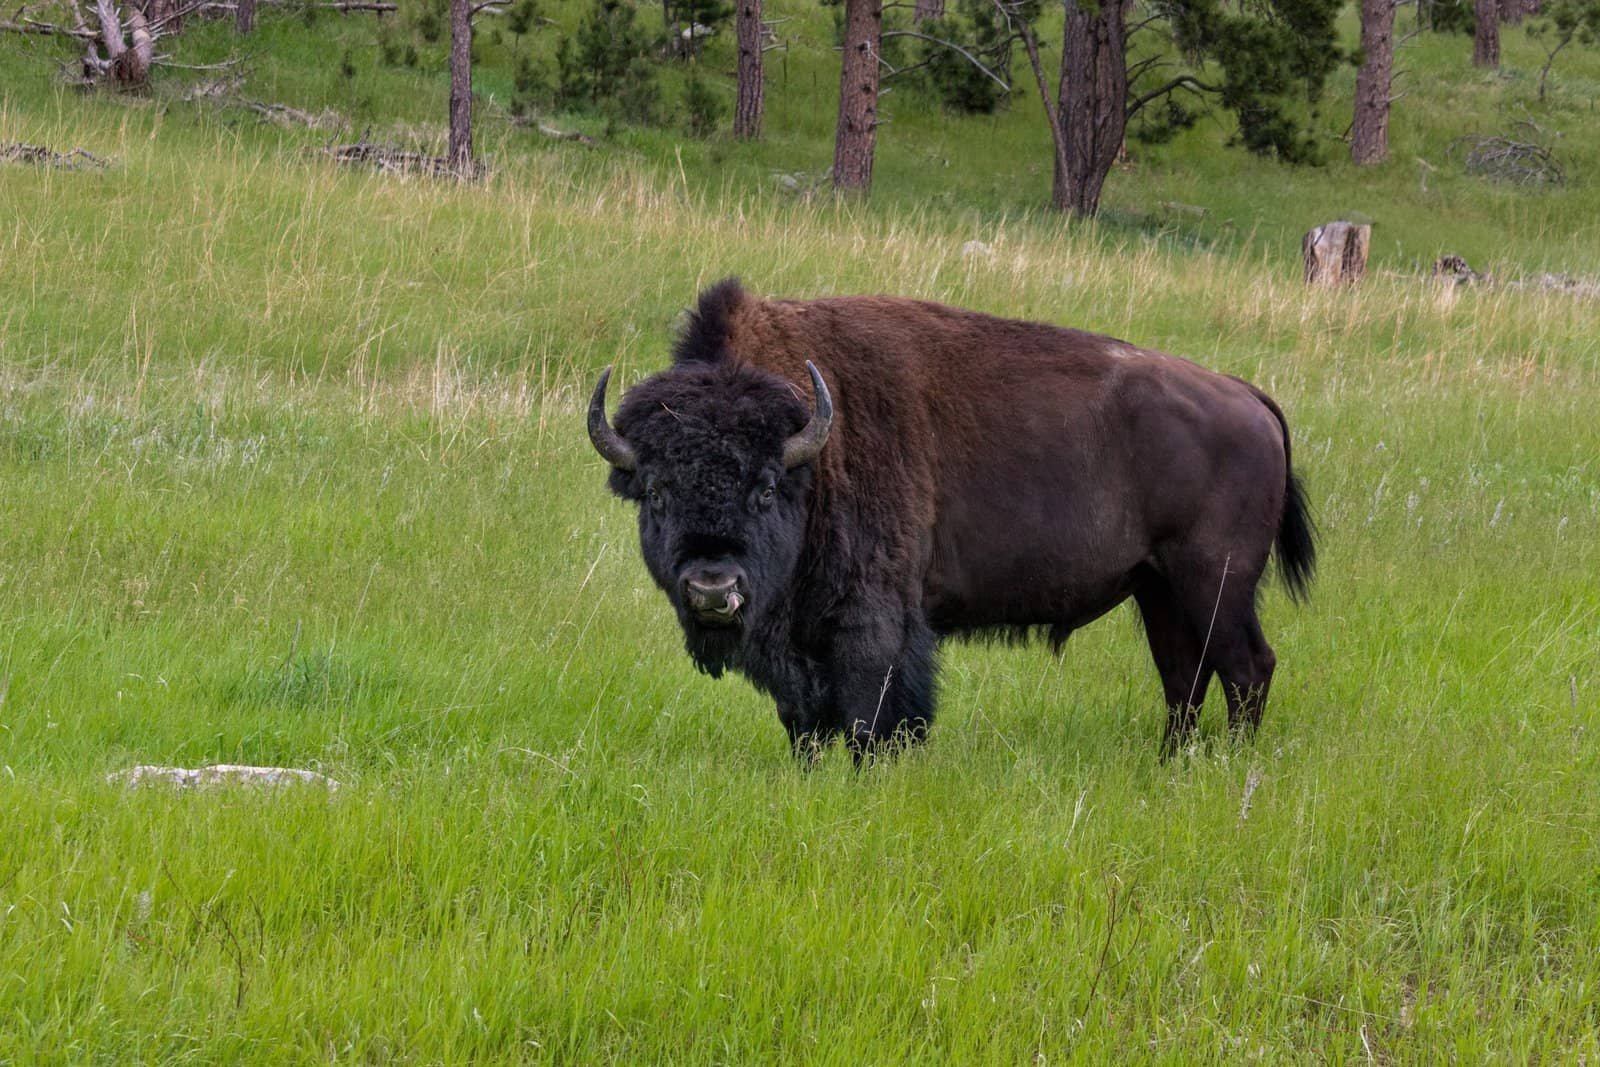 A buffalo looking at the camera in a meadow in Custer State Park.